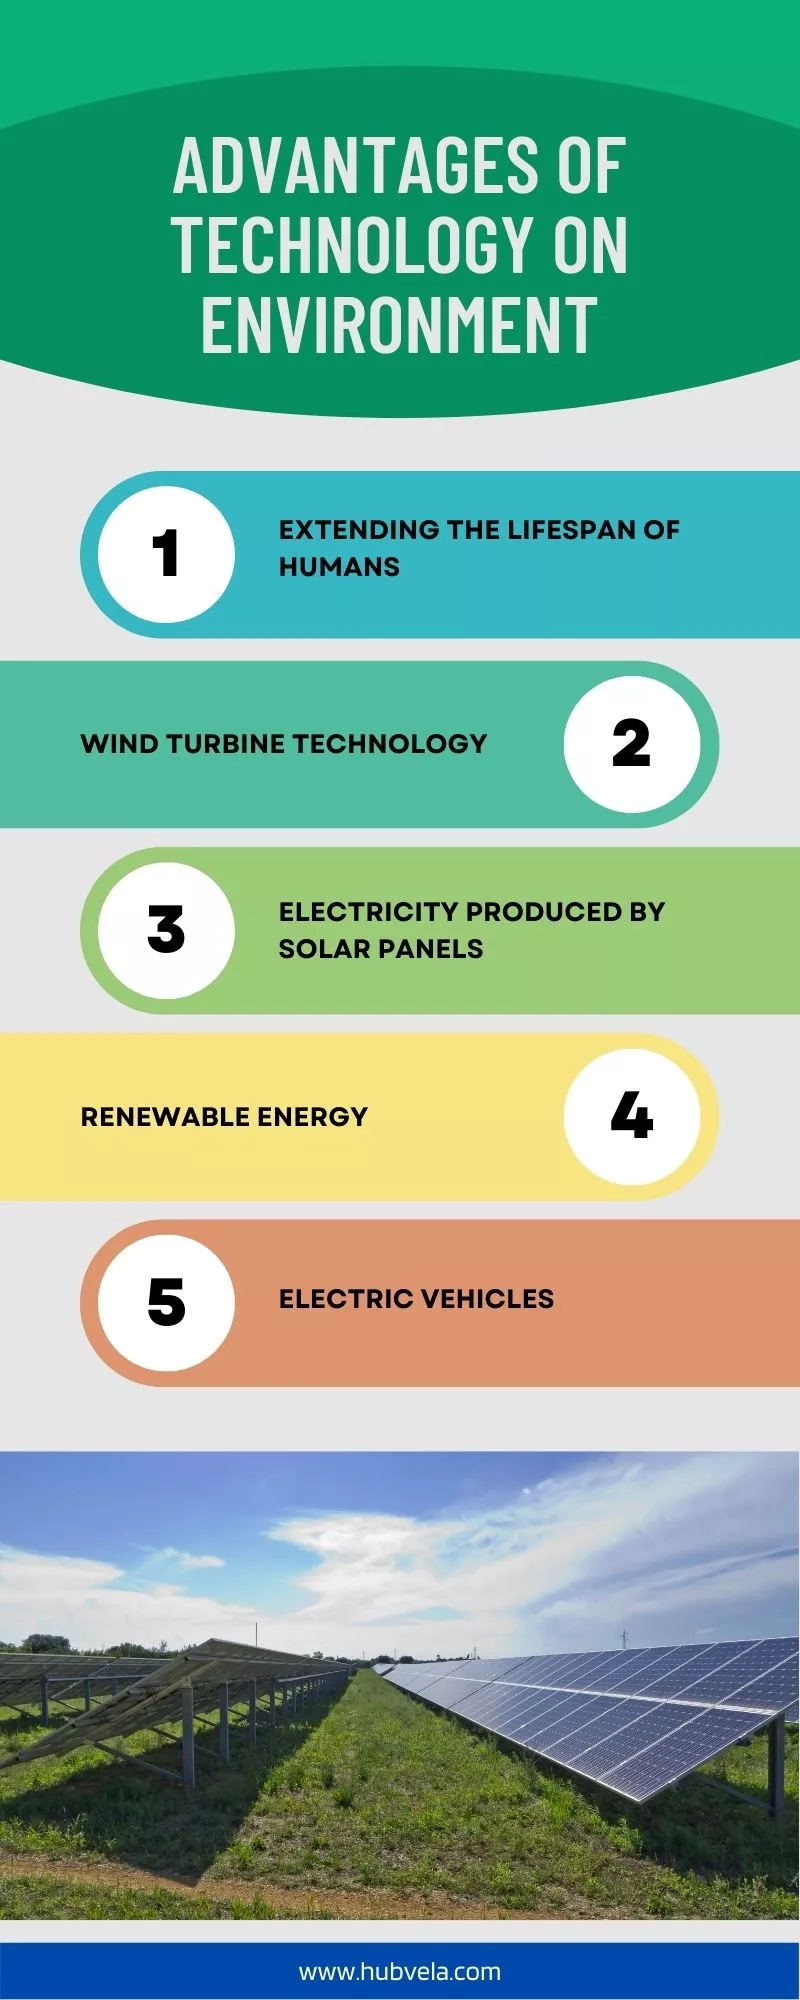 Advantages of Technology on Environment infographic